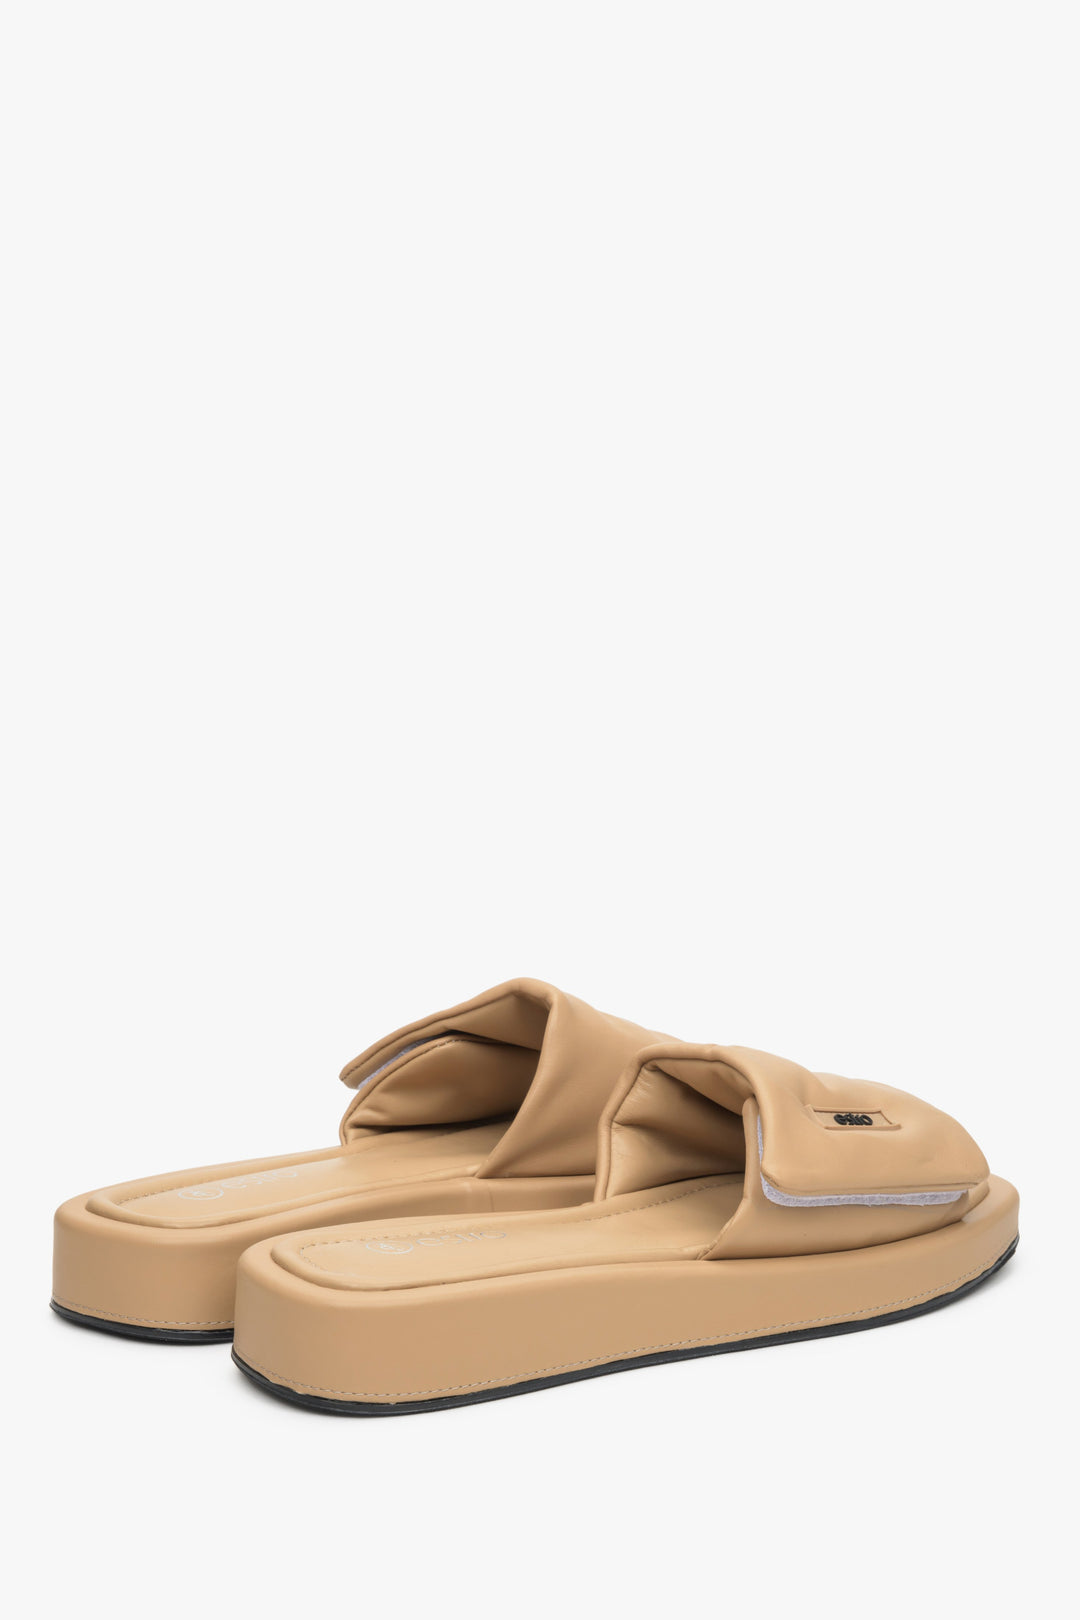 Leather slide sandals by Estro in beige.